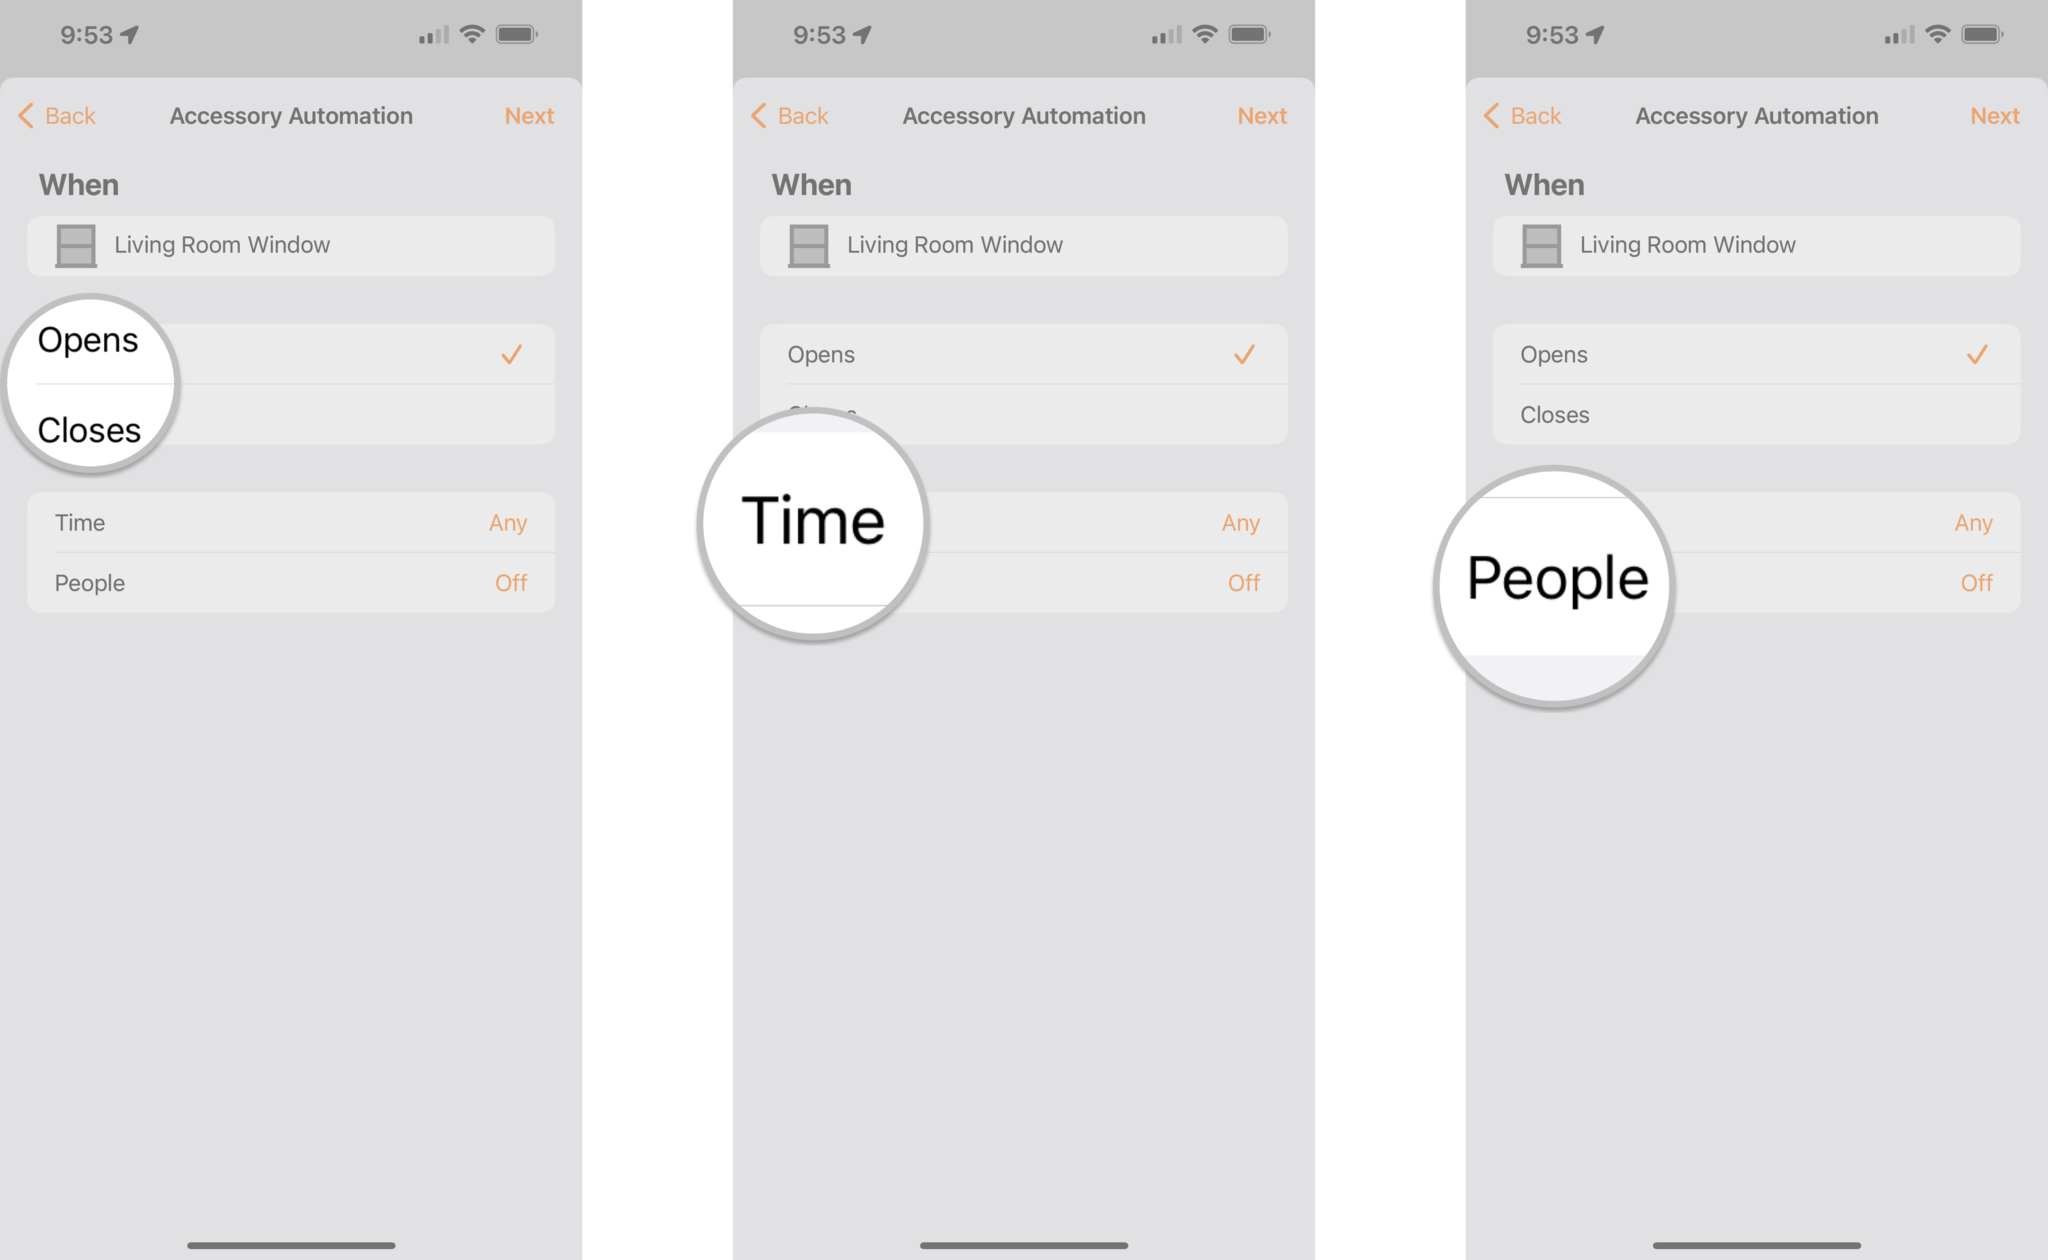 How to create an accessory automation in the Home app on the iPhone by showing steps: Tap on a desired accessory state, Tap Time, Tap People